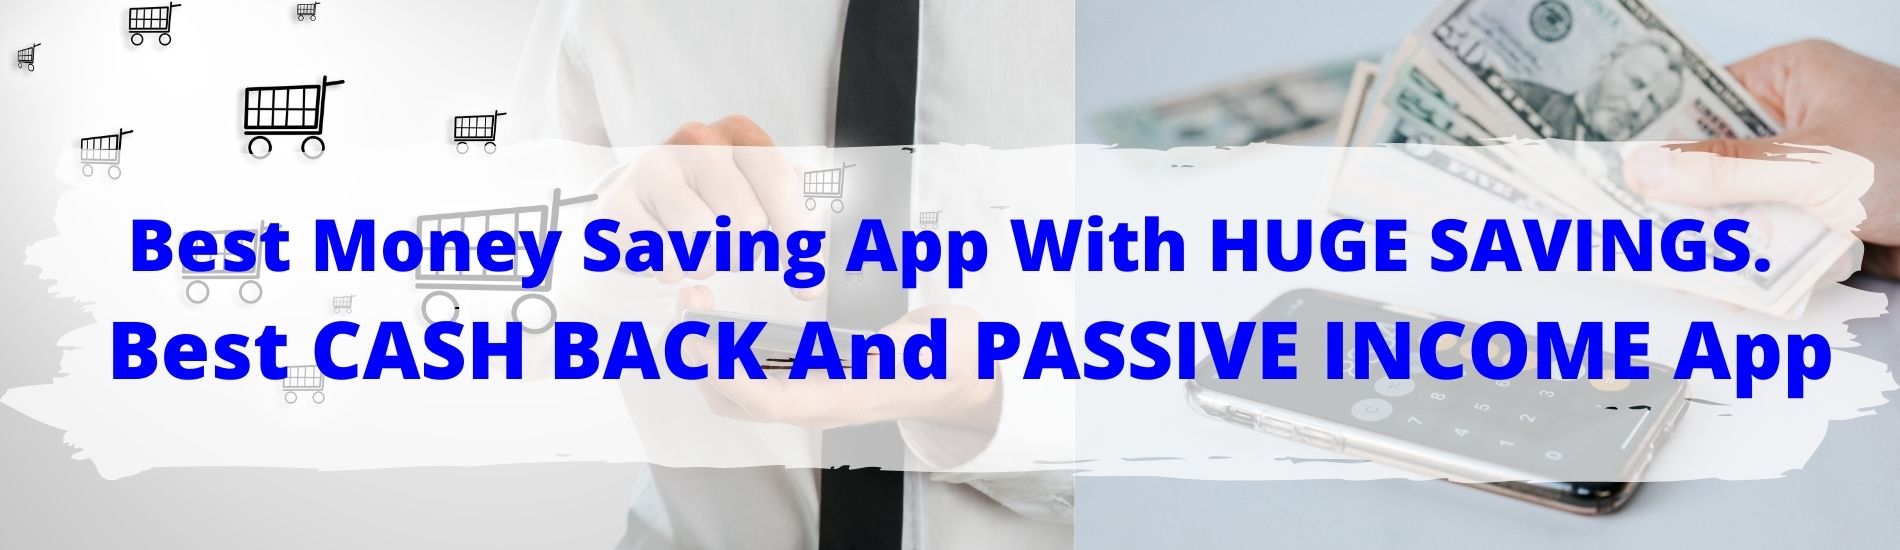 Best Money Saving App With HUGE SAVINGS. Best CASH BACK And PASSIVE INCOME App